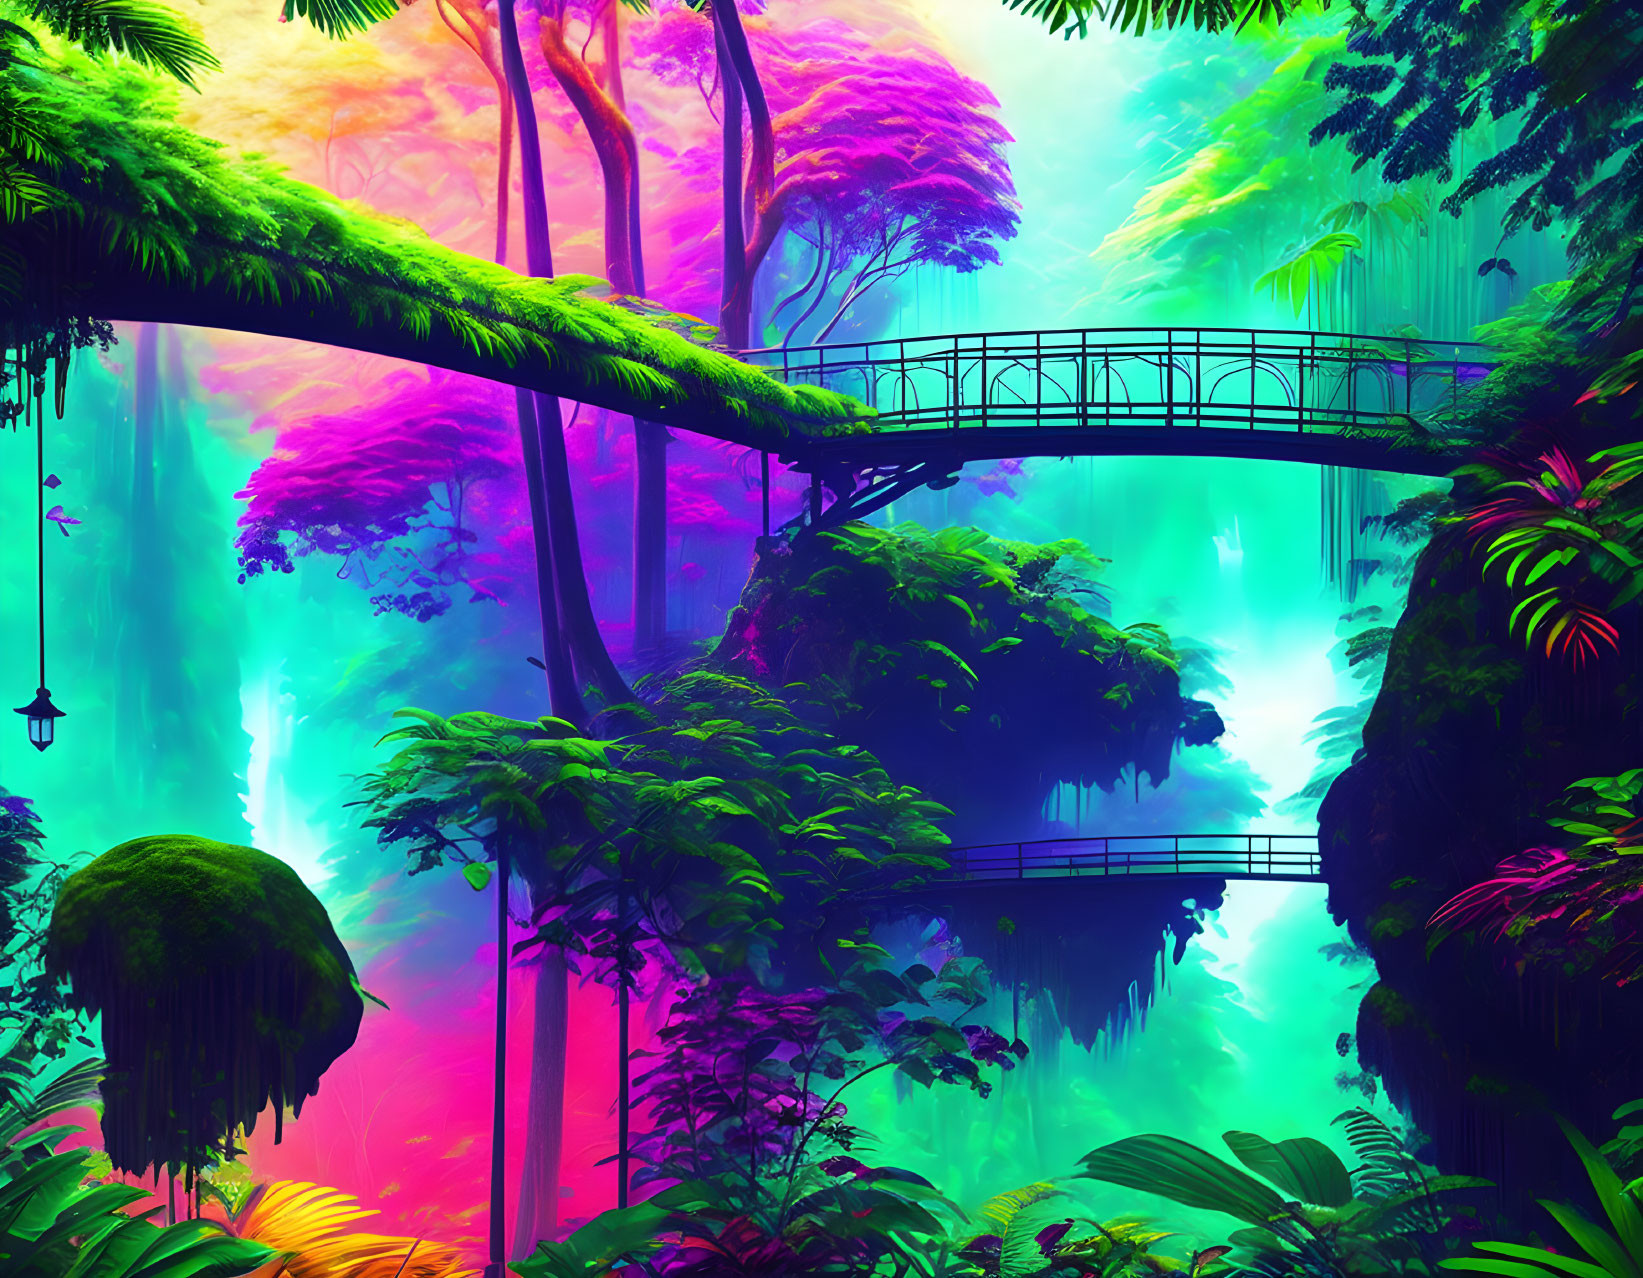 Fantasy Jungle with Neon Colors and Bridge in Mysterious Glow